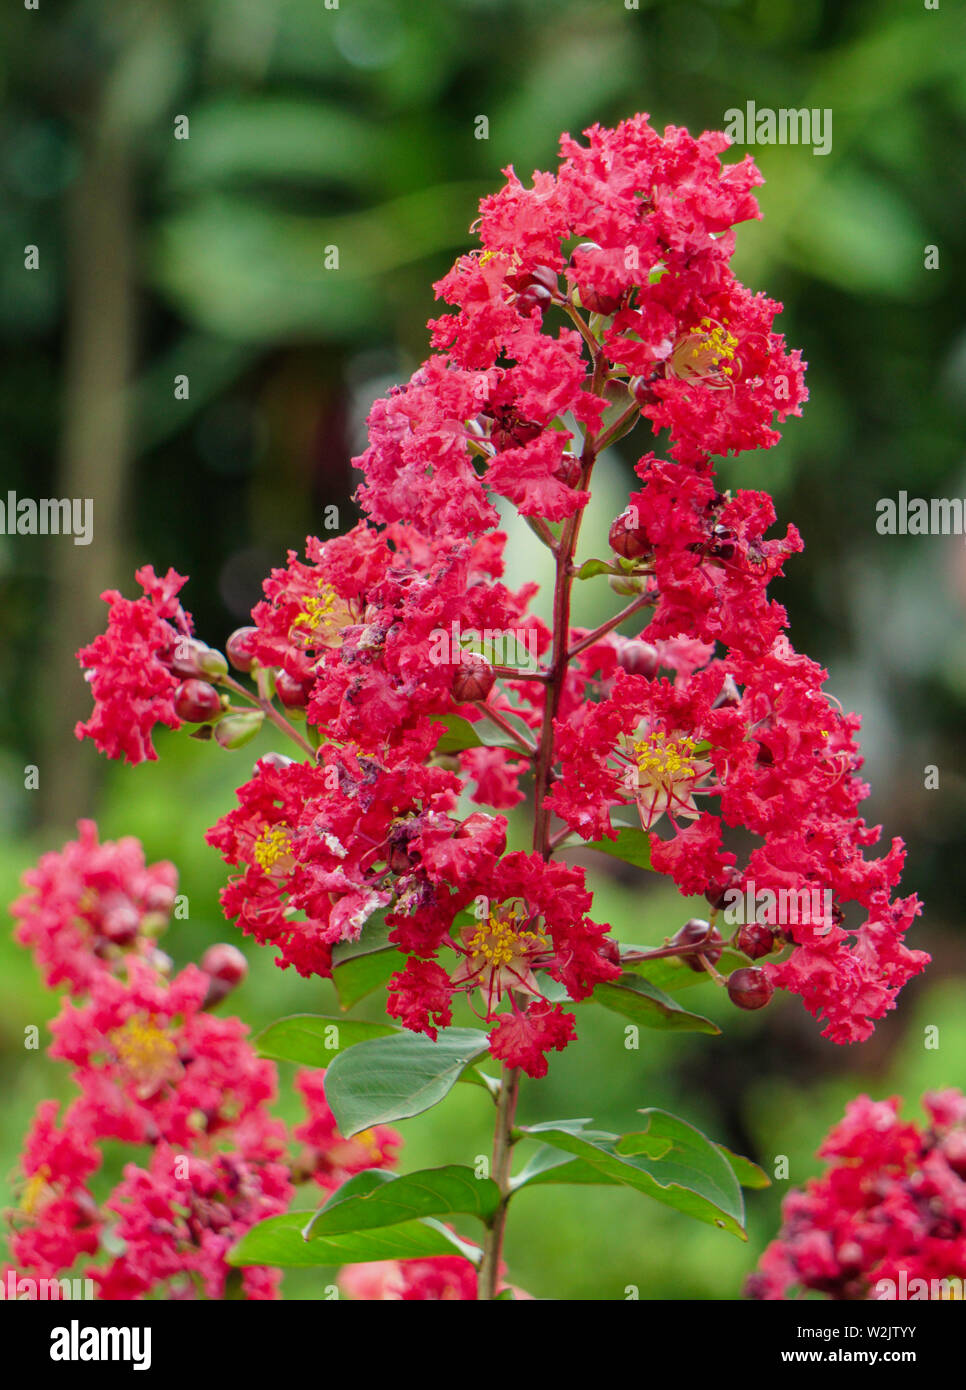 Beautiful Red Lilac Flowers in the garden Stock Photo - Alamy